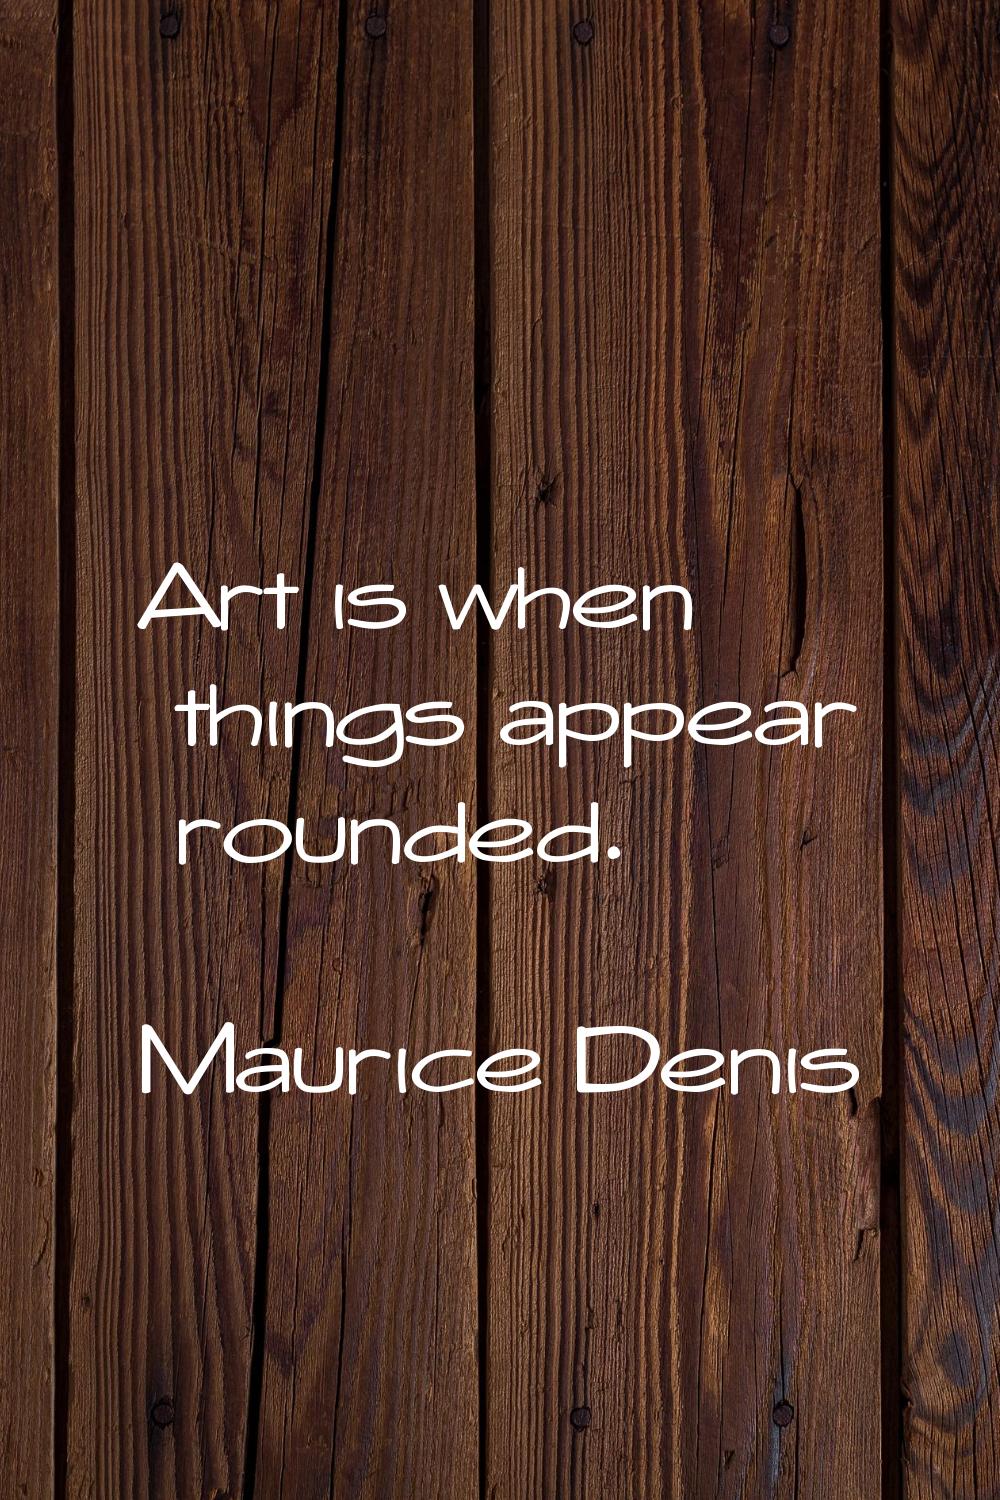 Art is when things appear rounded.